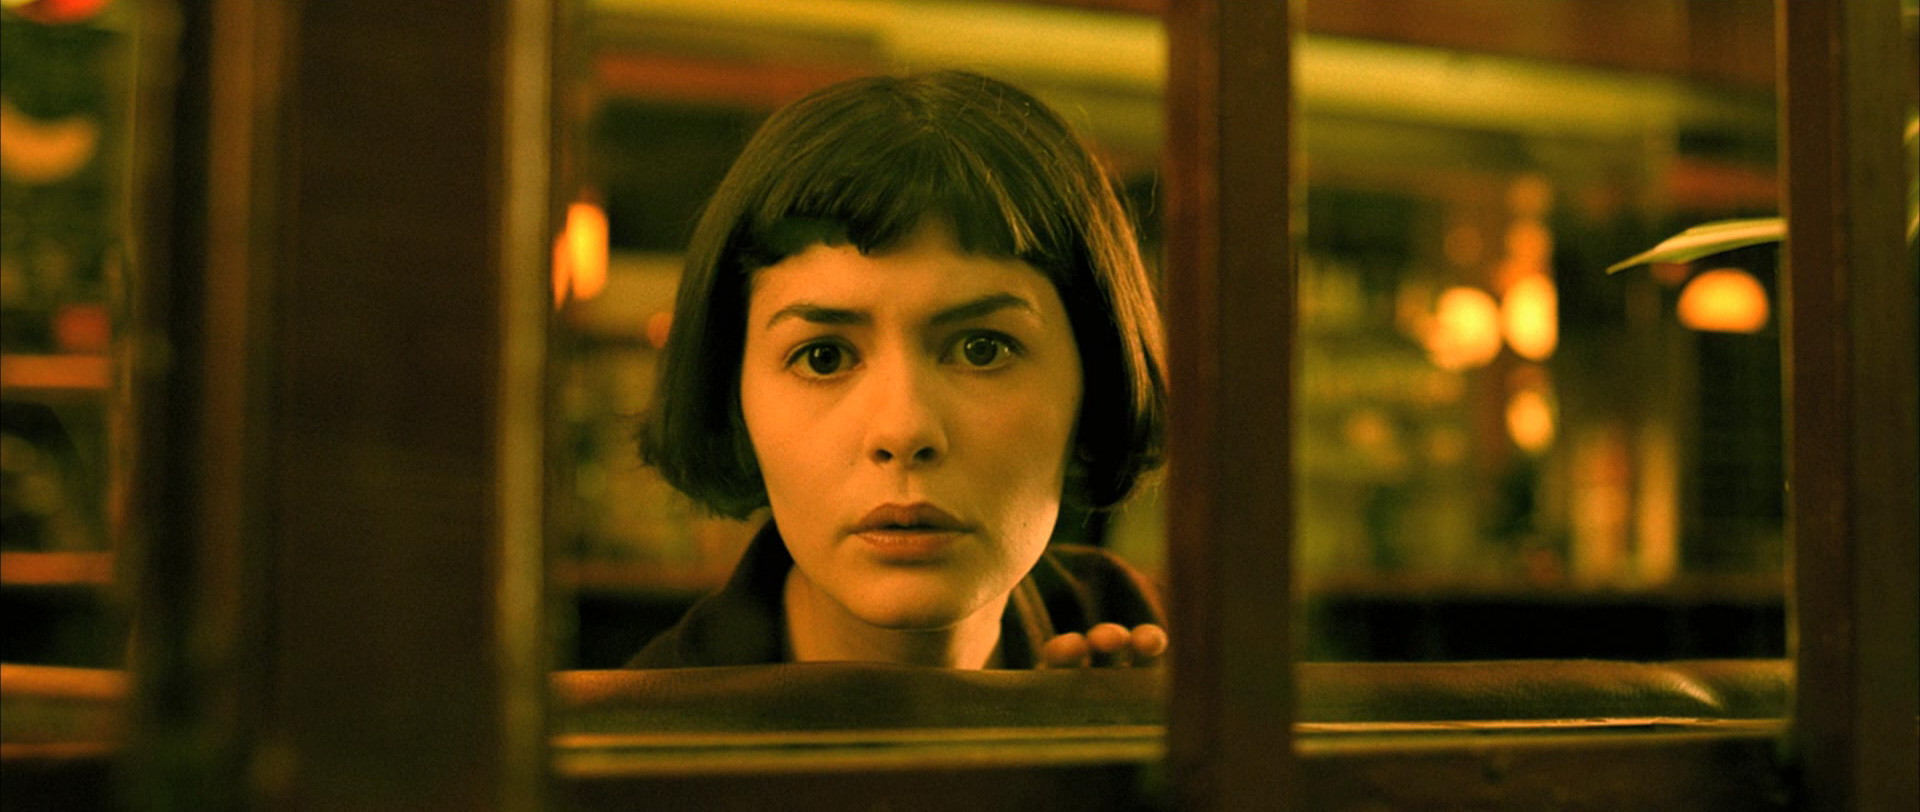 amelie movie outfits